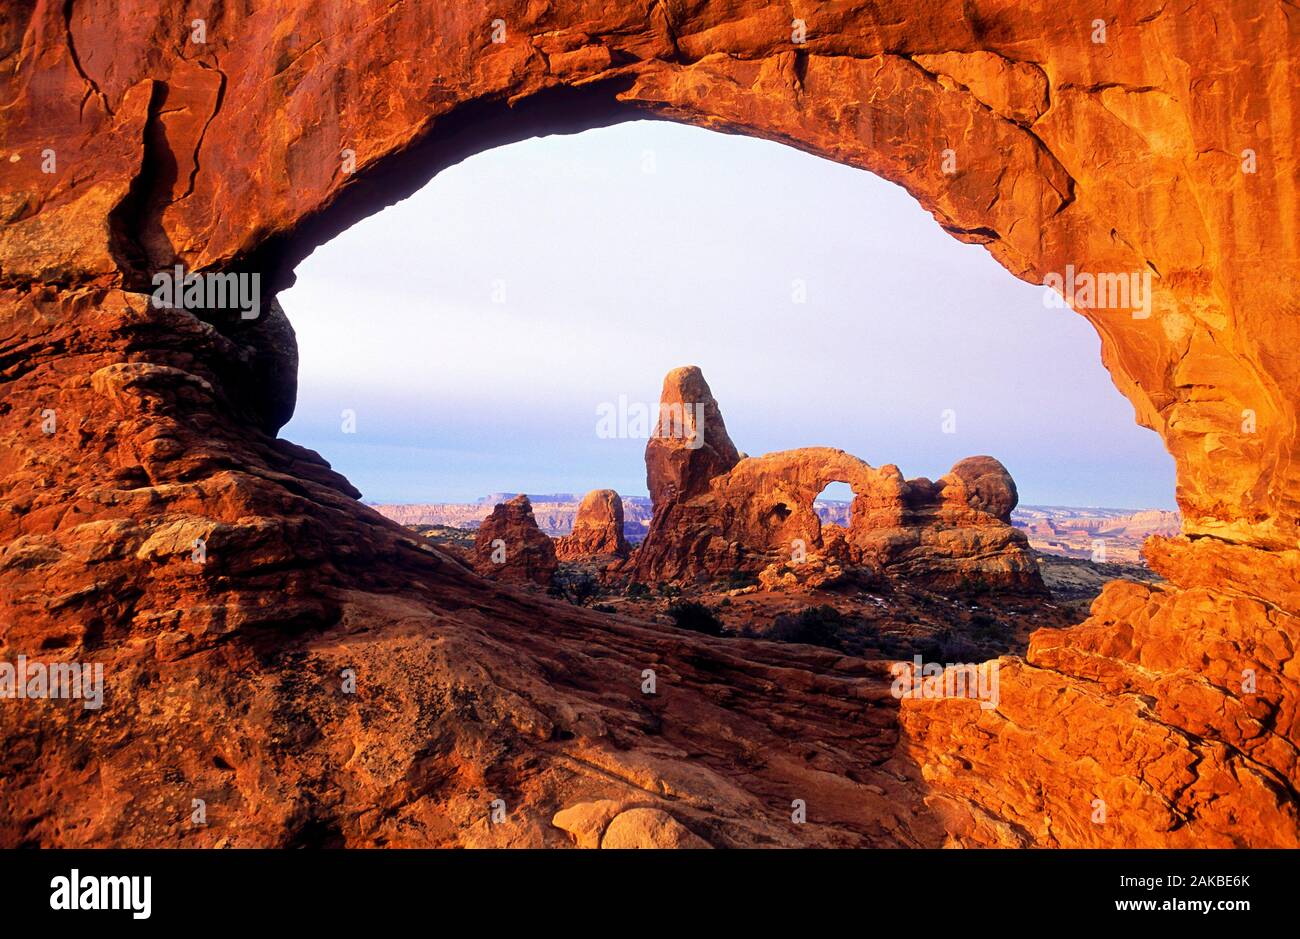 View of rocks with natural arch, Arches National Park, Utah, USA Stock Photo